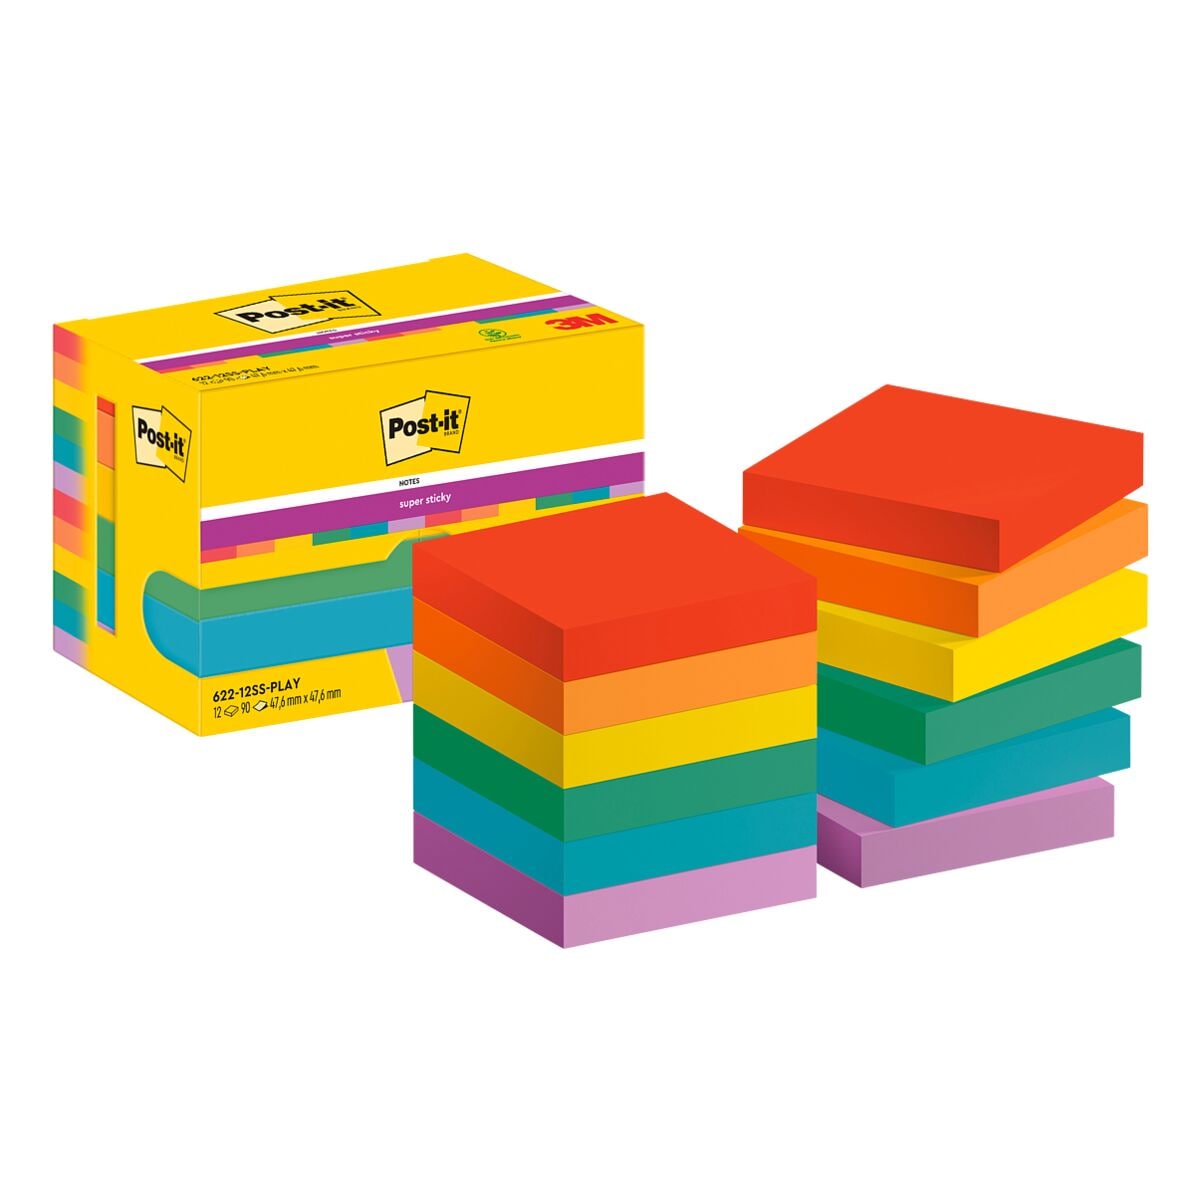 12x Post-it Super Sticky blok herkleefbare notes  Playful Collection 4,76 x 4,76 cm, 1080 bladen (totaal) 622-12SS-PLAY